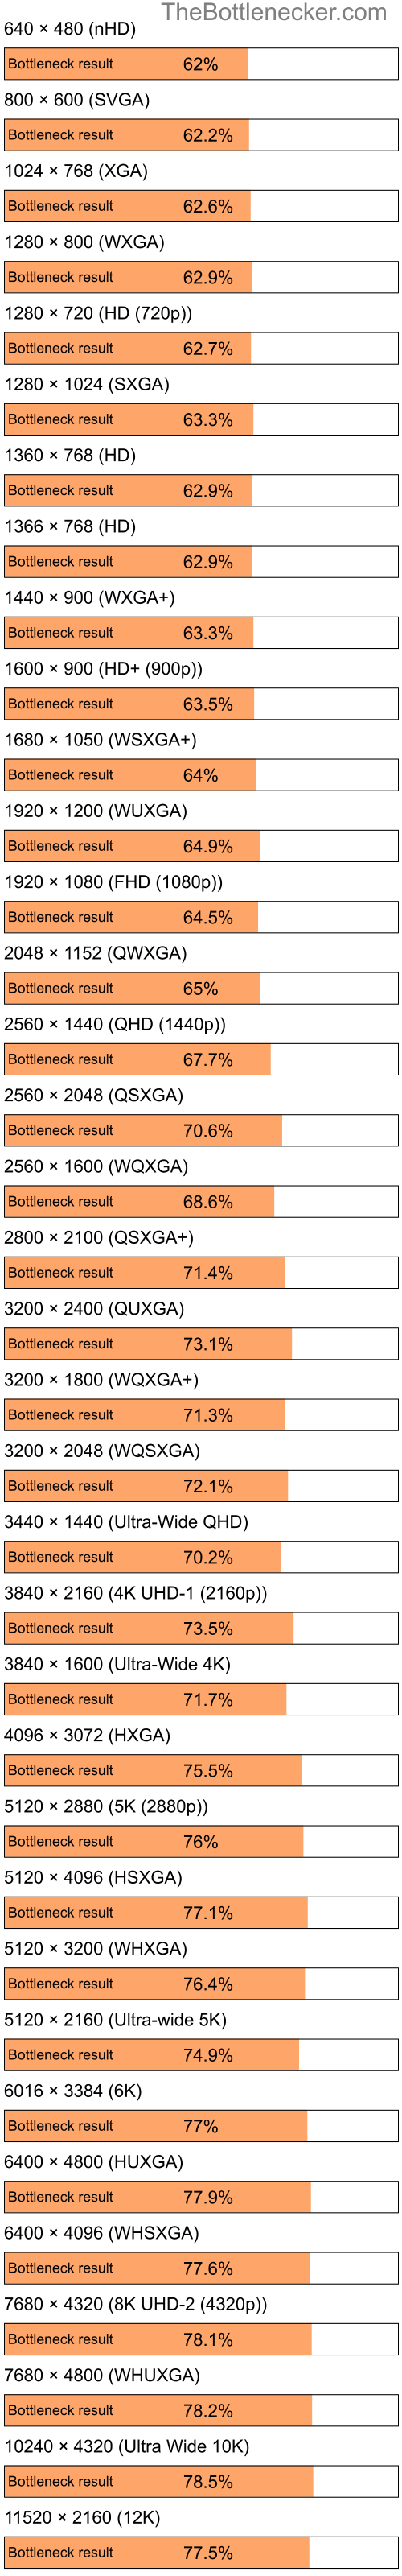 Bottleneck results by resolution for Intel Pentium 4 and NVIDIA Quadro NVS 135M in Processor Intense Tasks